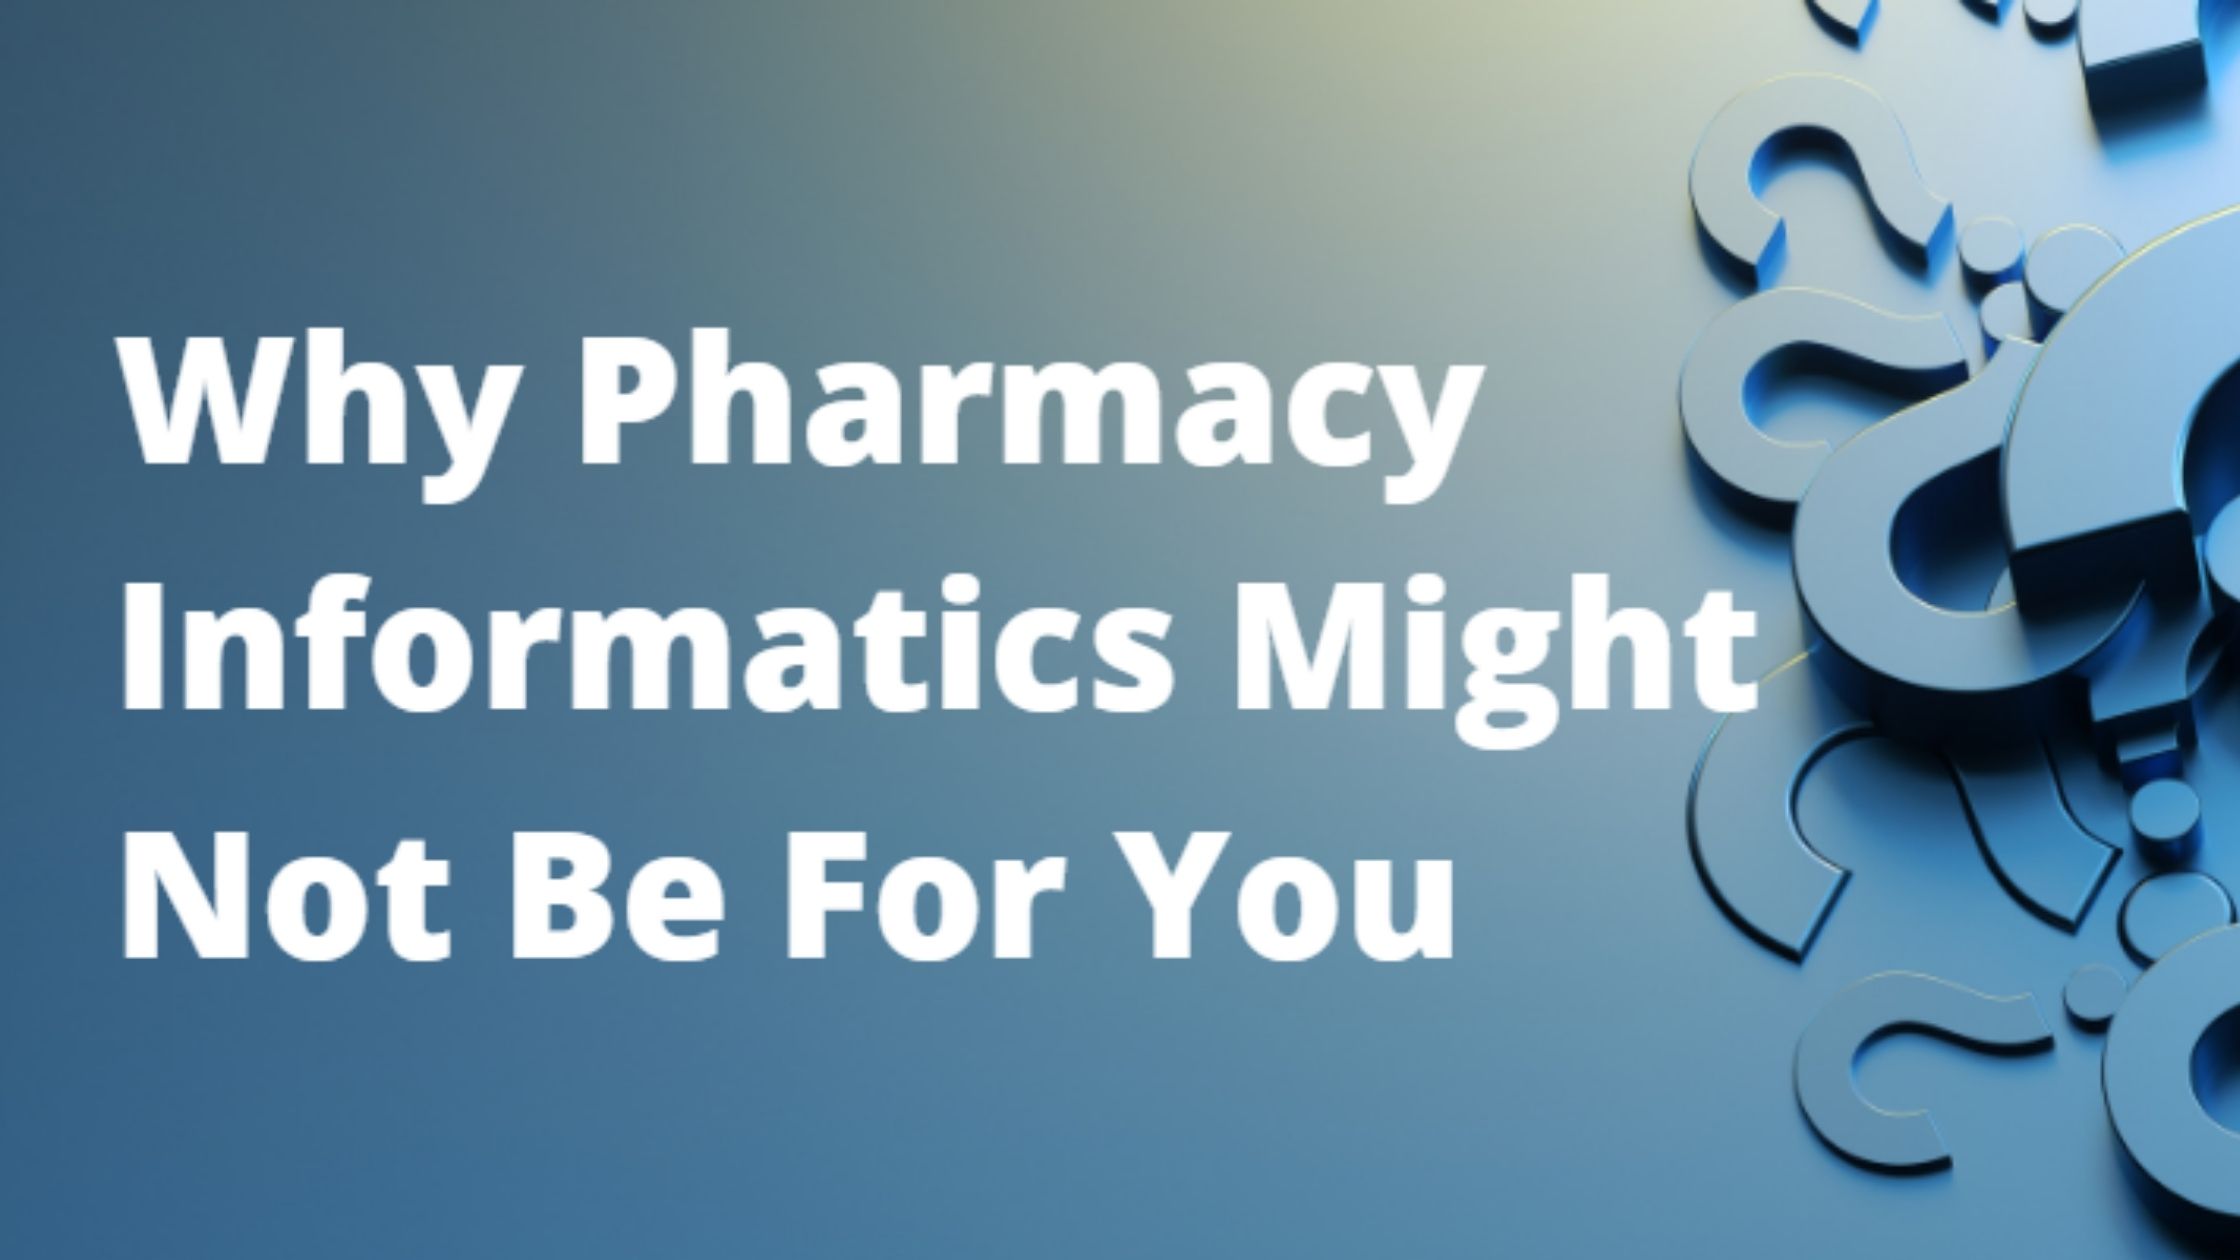 Why Pharmacy Informatics Might Not Be For You